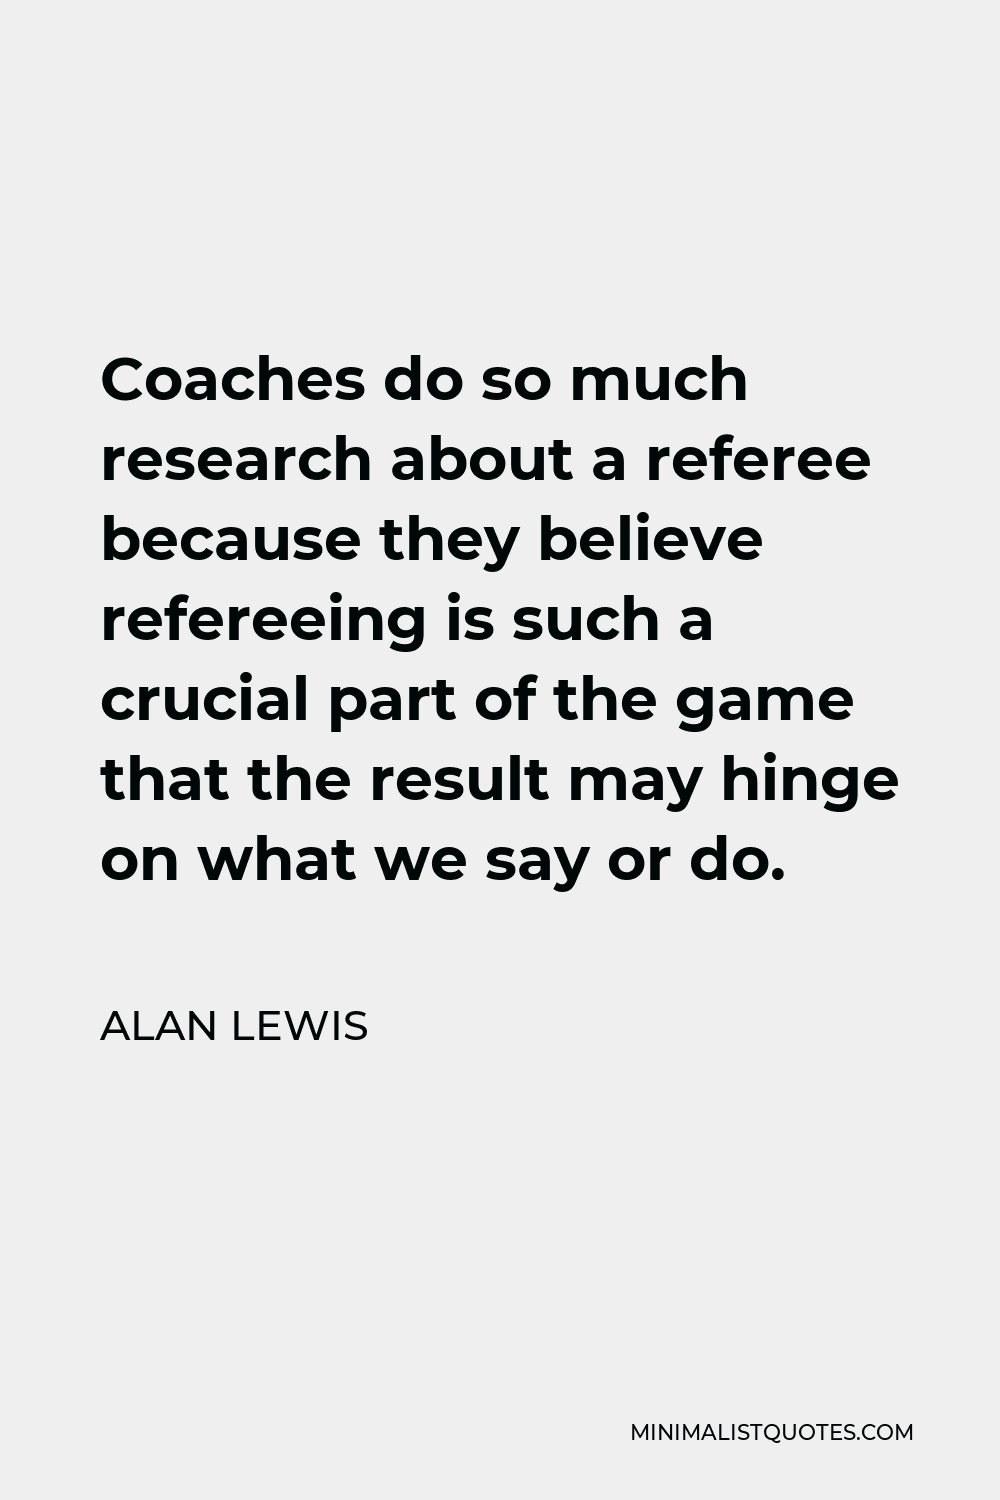 Alan Lewis Quote - Coaches do so much research about a referee because they believe refereeing is such a crucial part of the game that the result may hinge on what we say or do.